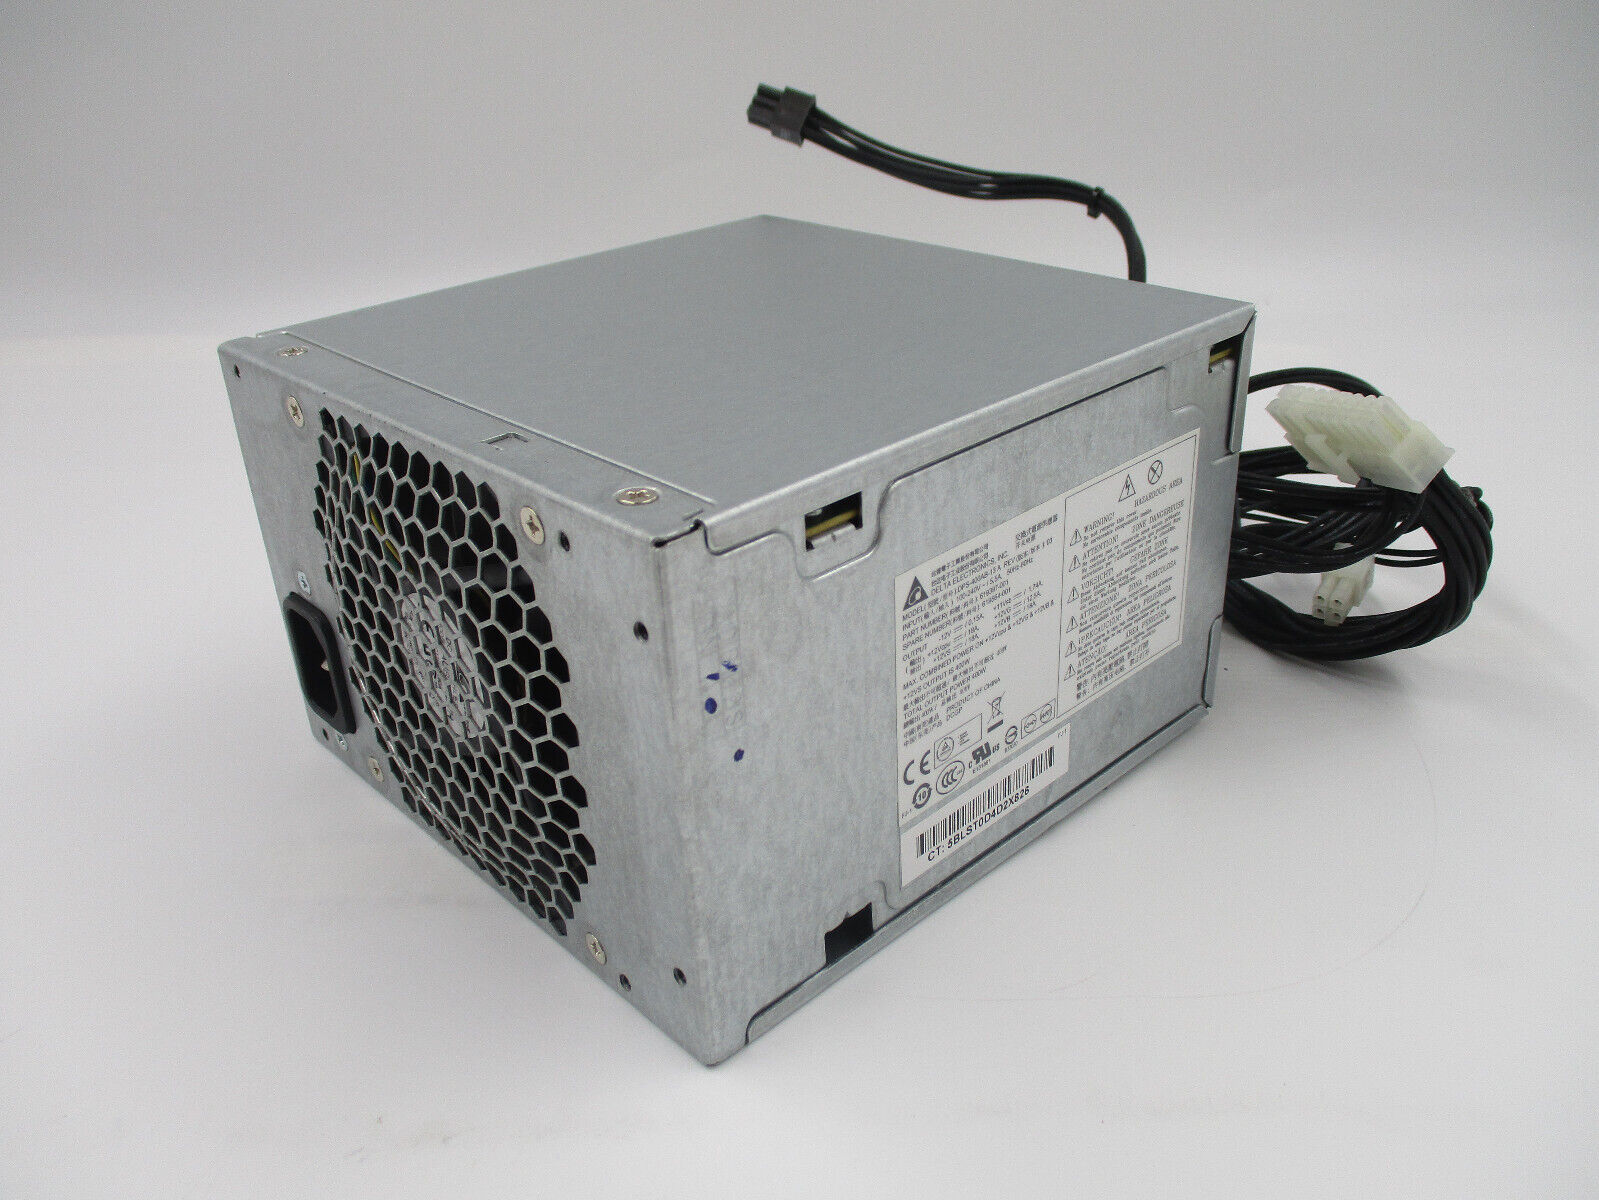 Delta Electronics DPS-400AB-13 12V 400W Power Supply HP P/N 619564-001 Tested